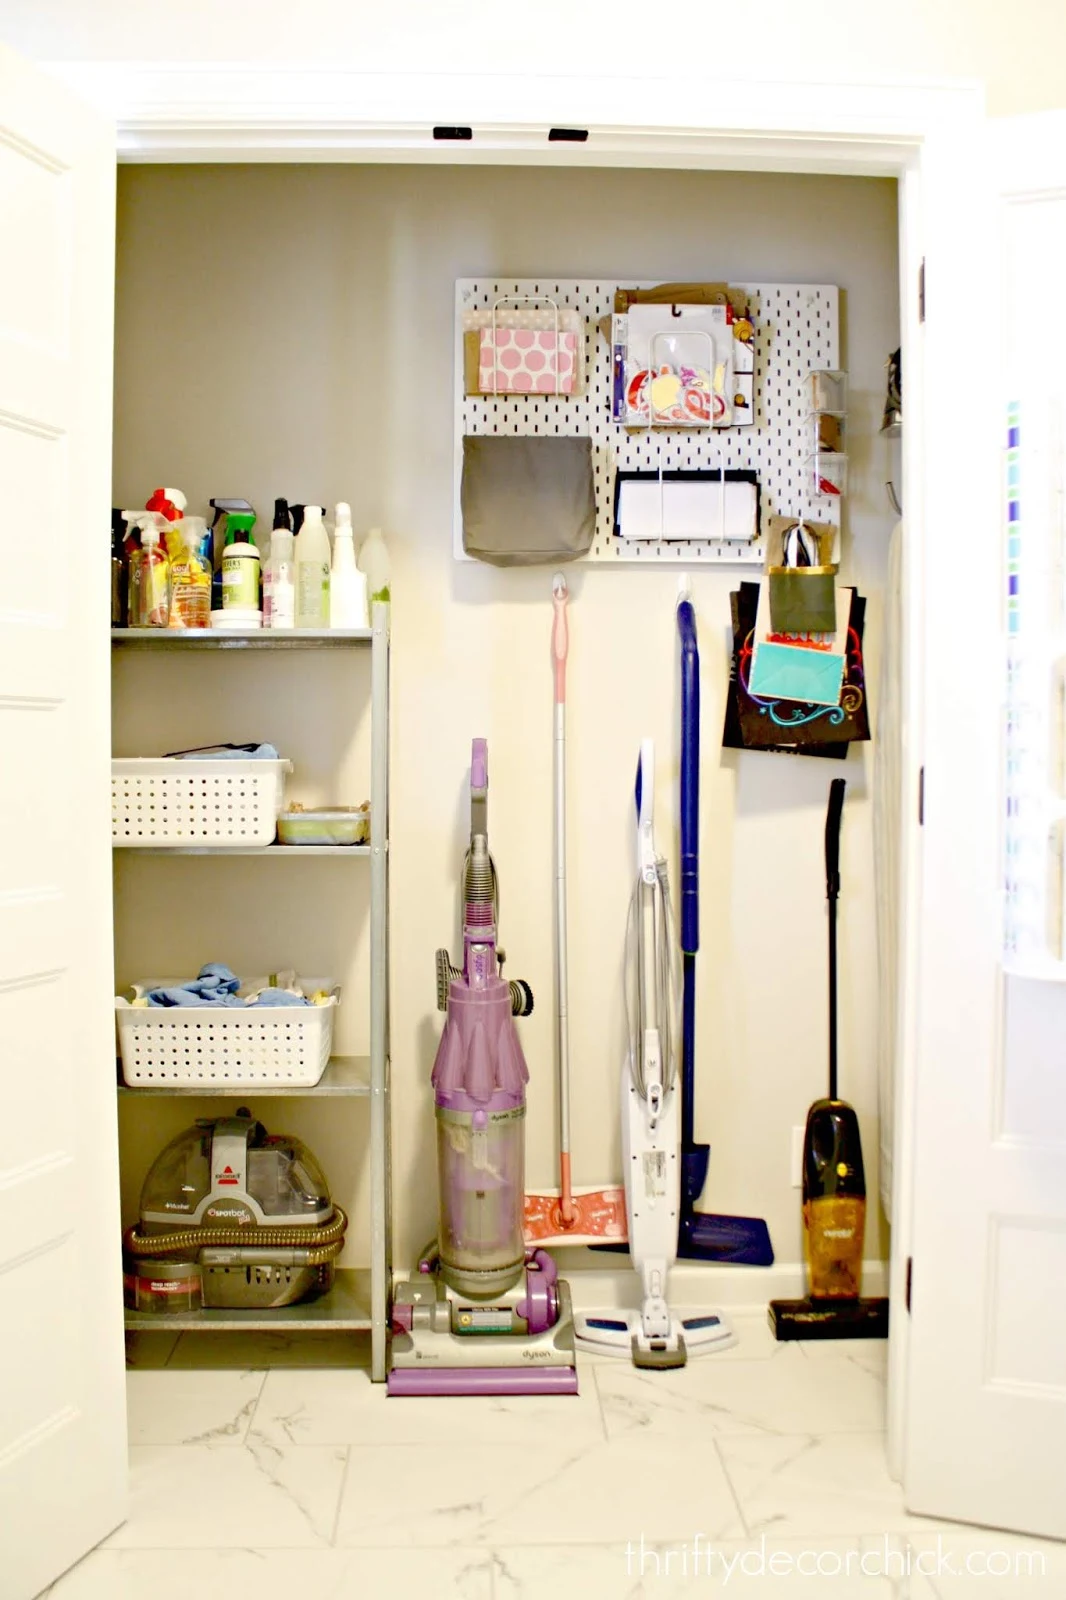 Best closet ever for cleaning supplies